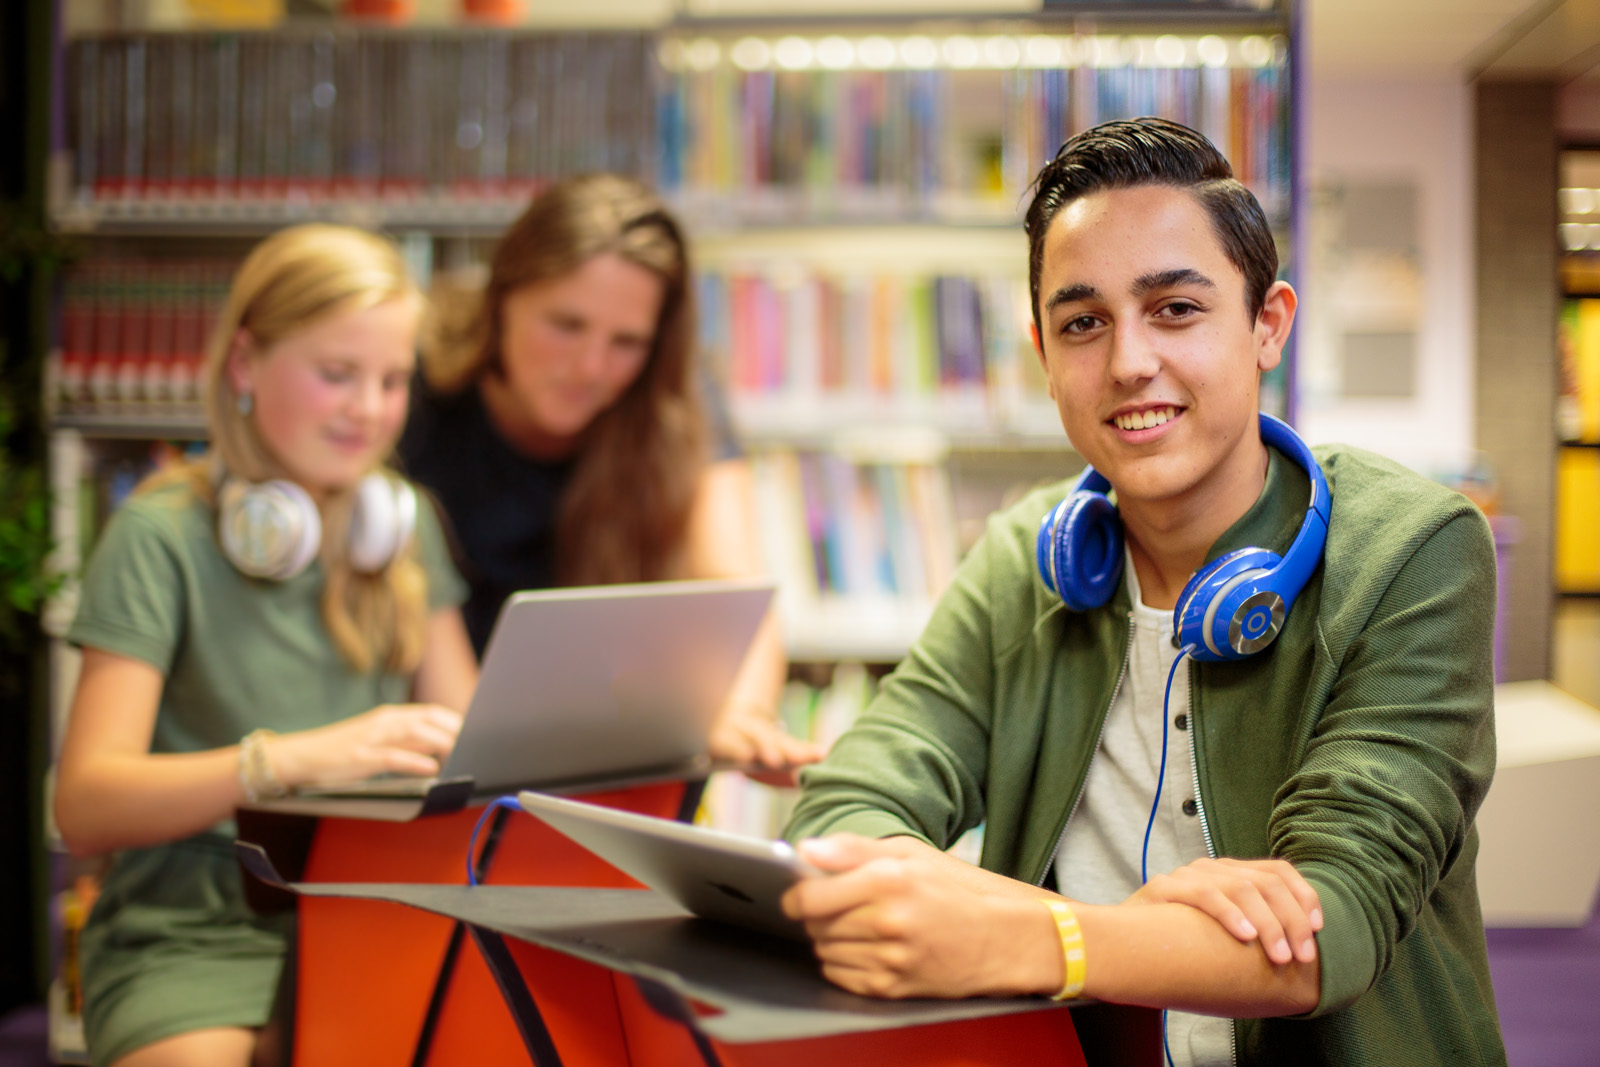 This is a photograph taken in a school library. In the foreground to the right is a teenager sitting at a very small desk with a tablet device in one hand and a set of blue headphones around his neck. He has dark hair and is smiling directly at the camera. Moving backwards, the photograph loses focus but shows a blonde haired girl roughly of ten years old. She has white headphones around her neck and along with a long haired lady sat next to her. Behind    them is an increasingly less focused set of two bookcases. End of description.